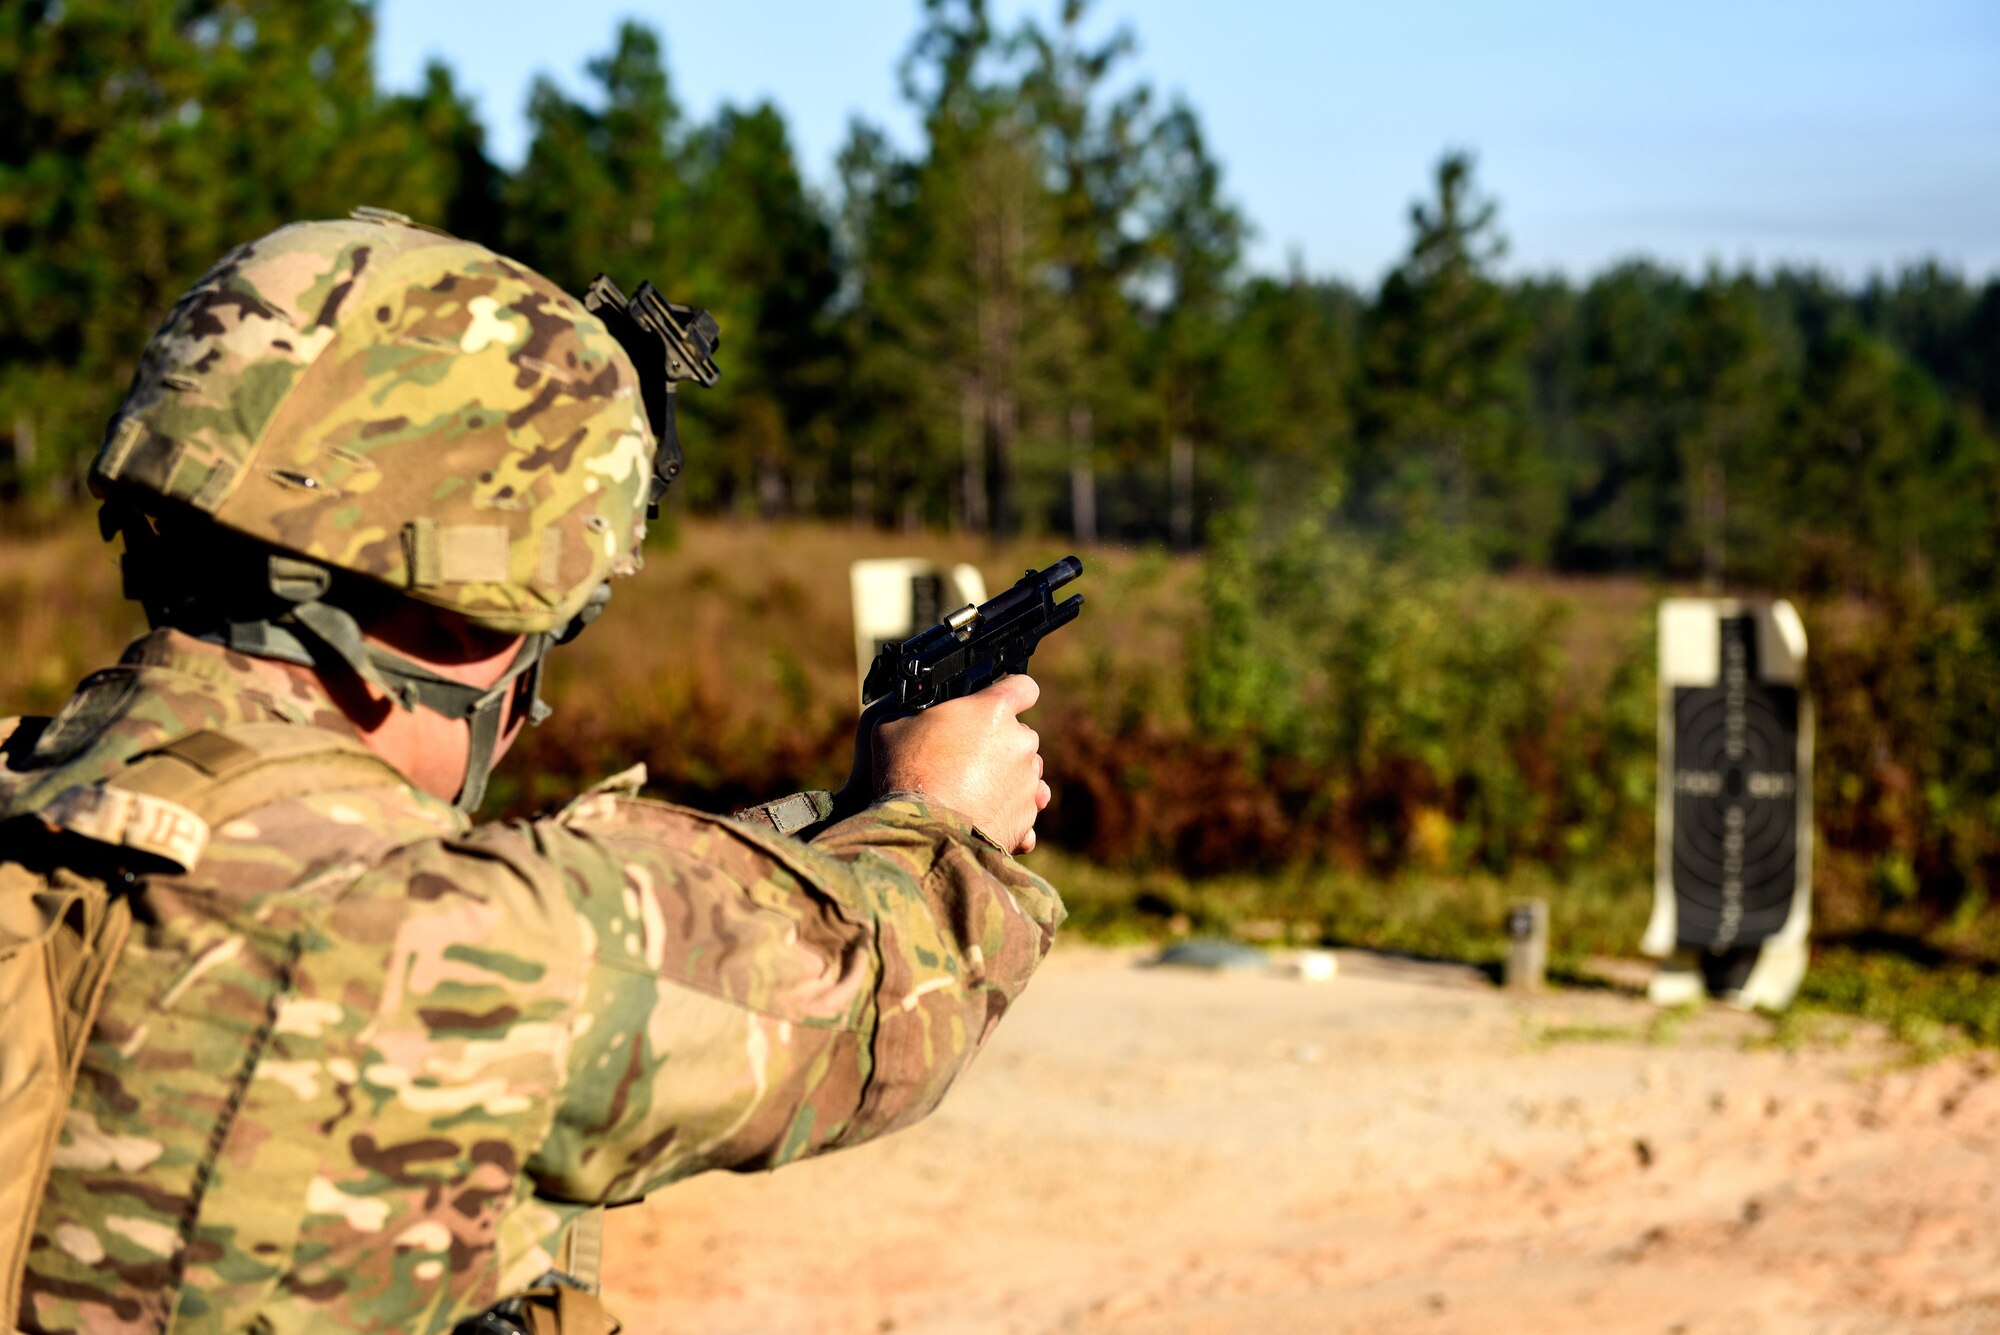 Senior Airman Parker White, a combat arms training and maintenance instructor with the 1st Special Operations Security Forces Squadron, fires an M9 pistol during Task Force Exercise Southern Strike at Camp Shelby, Miss., Oct 23, 2016. Air Commandos received in-depth weapons training from combat arms training and maintenance instructors with the 1st SOSFS. (U.S. Air Force photo by Senior Airman Jeff Parkinson)